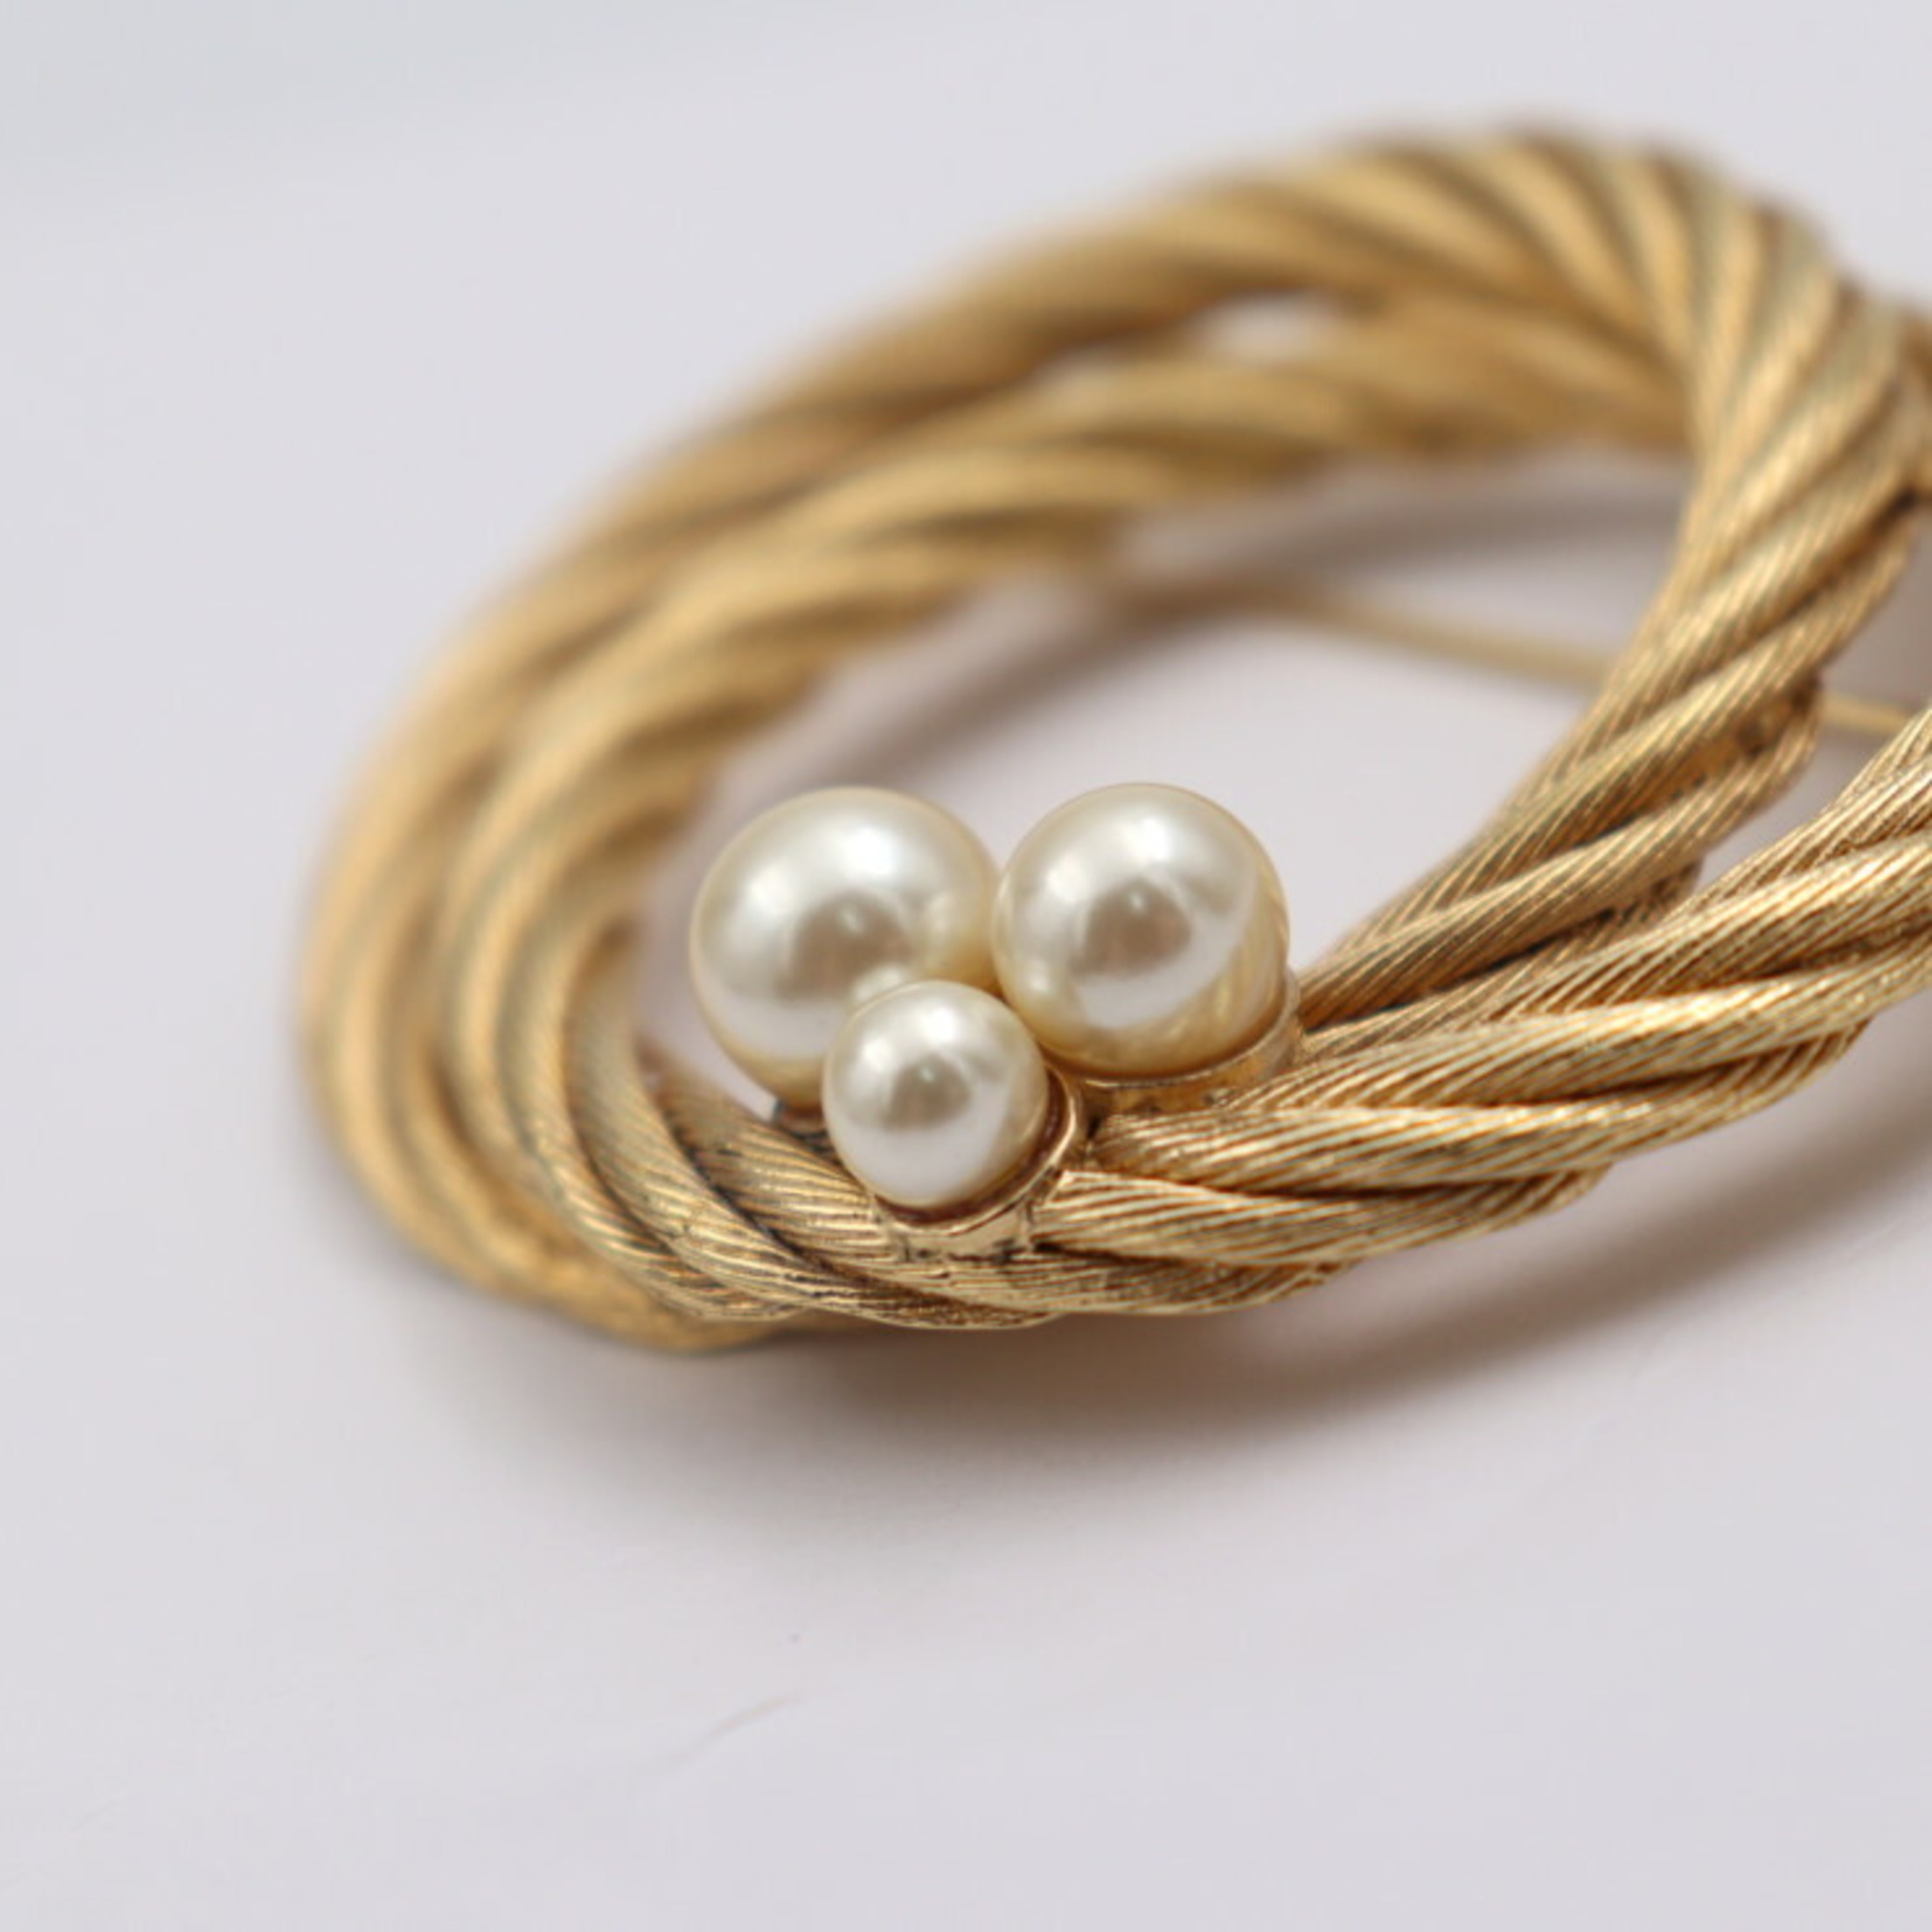 Christian Dior Pin Brooch Metal Gold Faux Pearl Rope